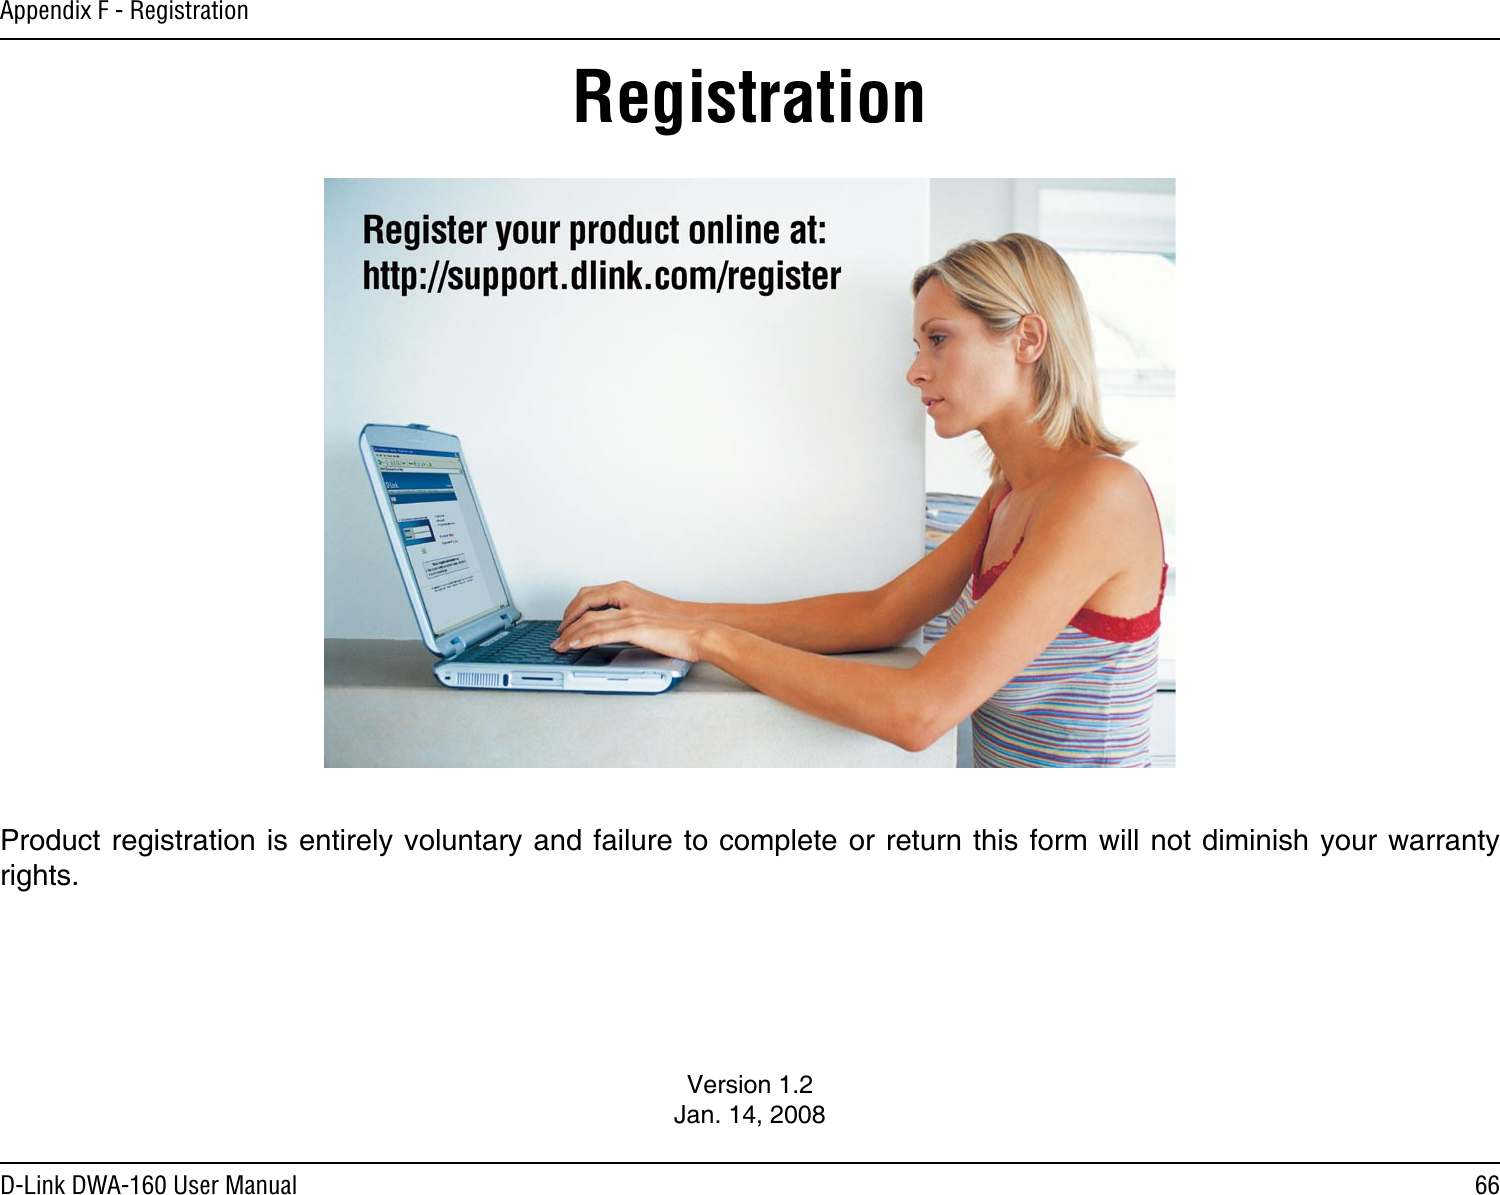 66D-Link DWA-160 User ManualAppendix F - RegistrationVersion 1.2Jan. 14, 2008Product registration is entirely voluntary and failure to complete or return this form will not diminish your warranty rights.Registration